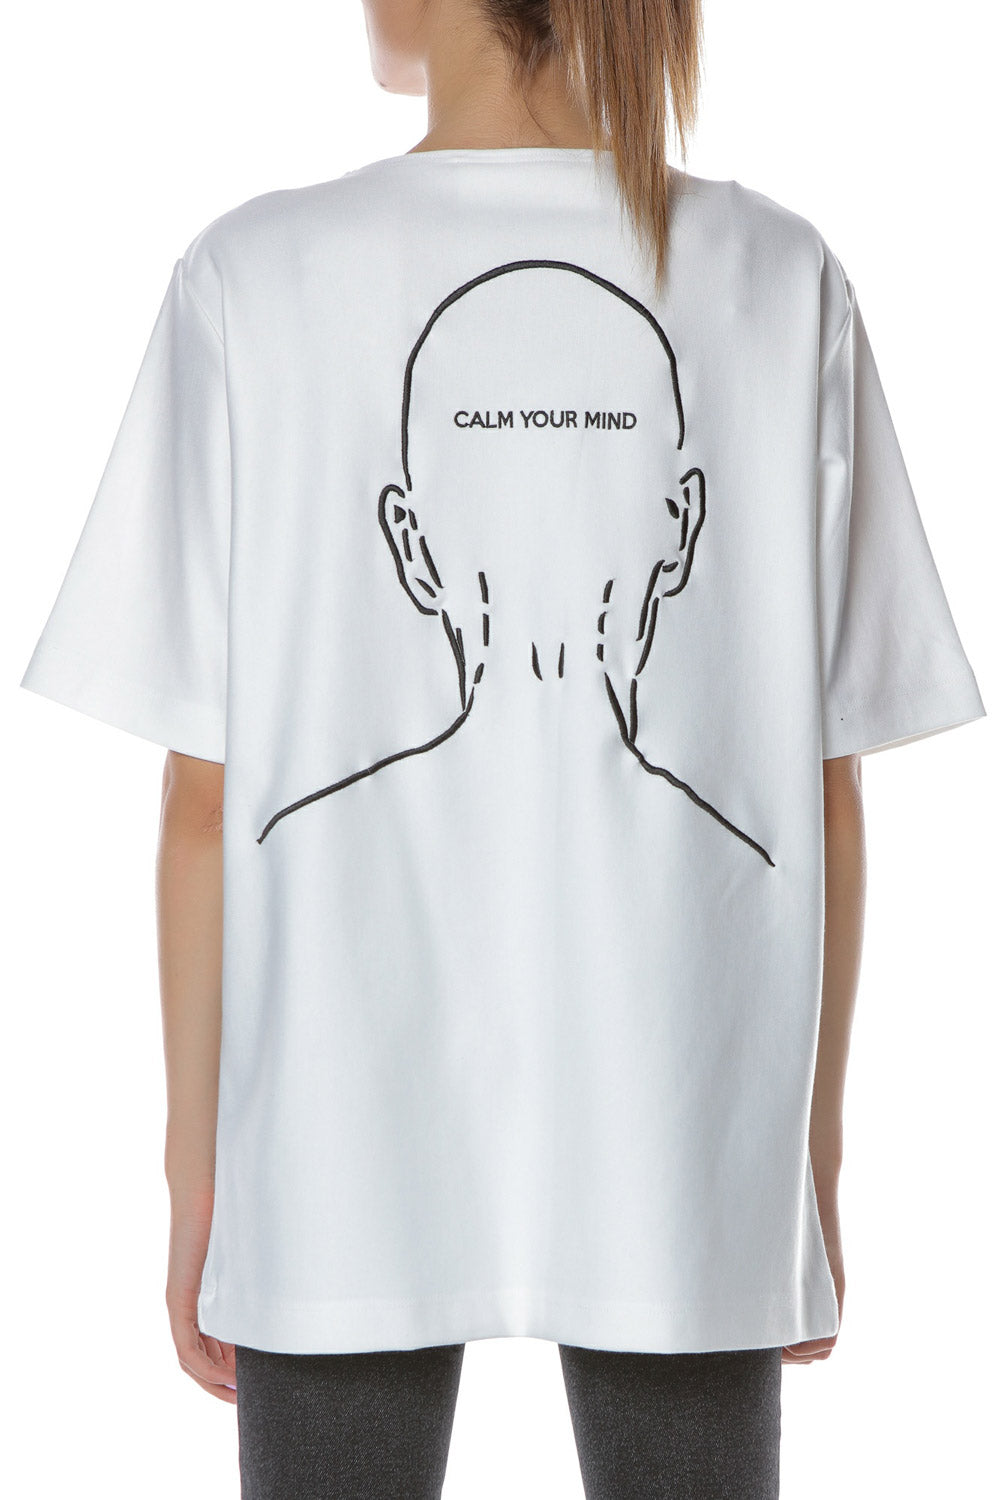 CALM embroidered W WHITE T-shirt